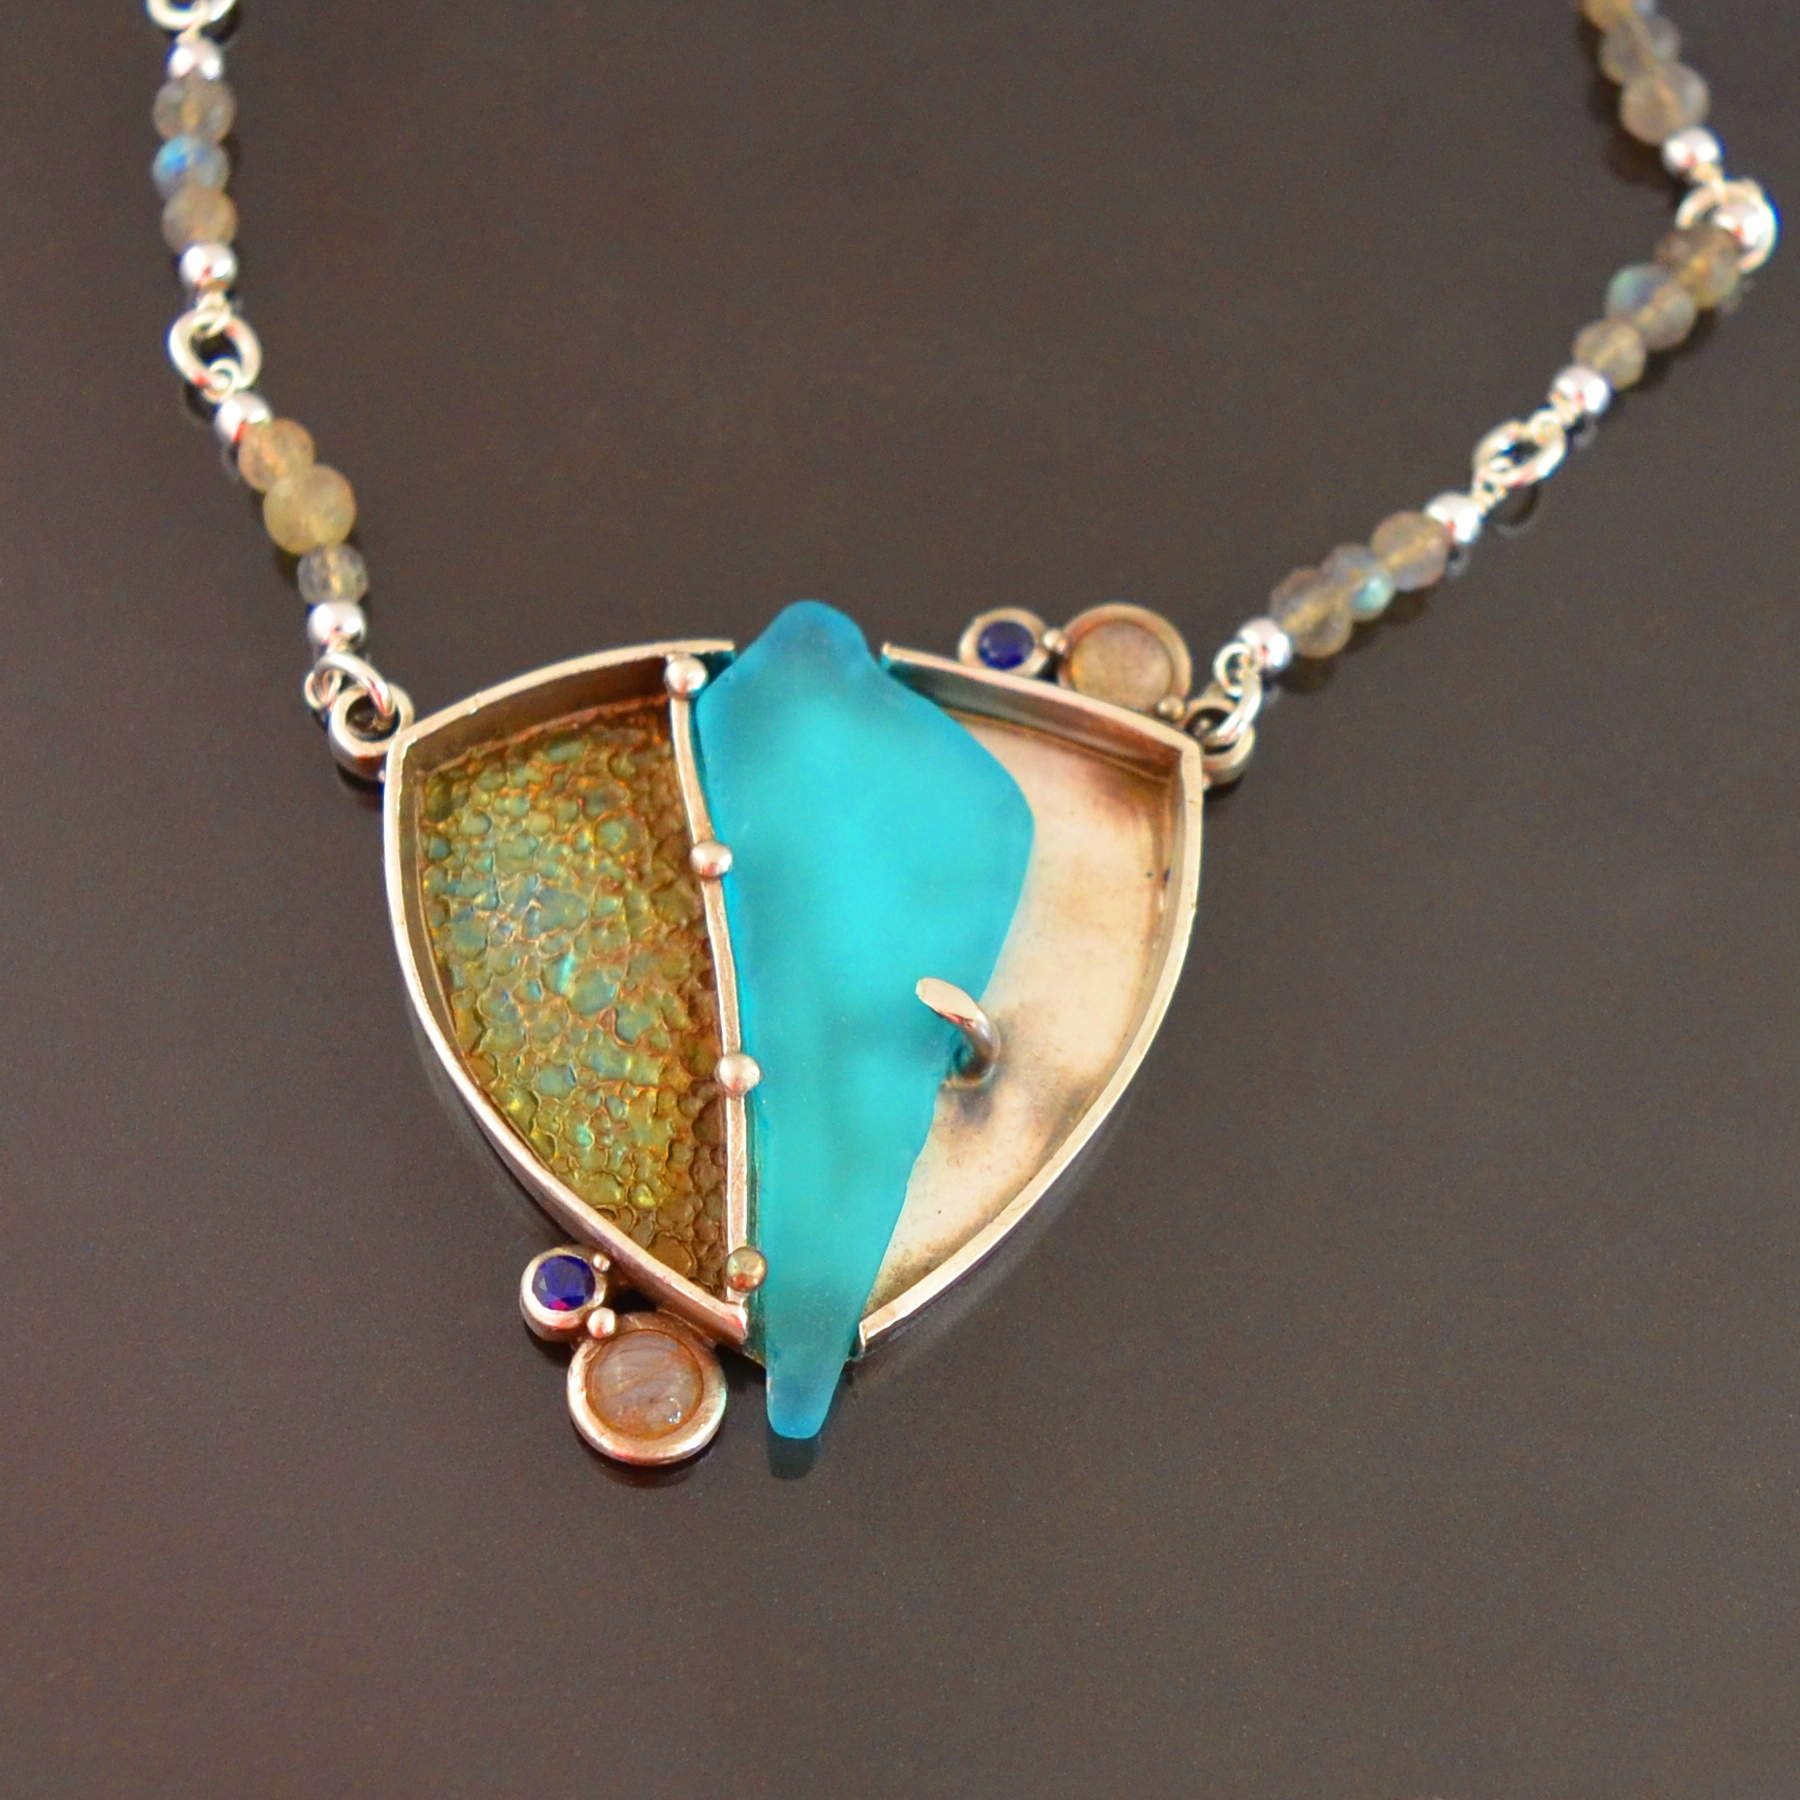 Sea Glass and Silver Clay Pendant by Tracey Spurgin of Craftworx Jewellery Workshops